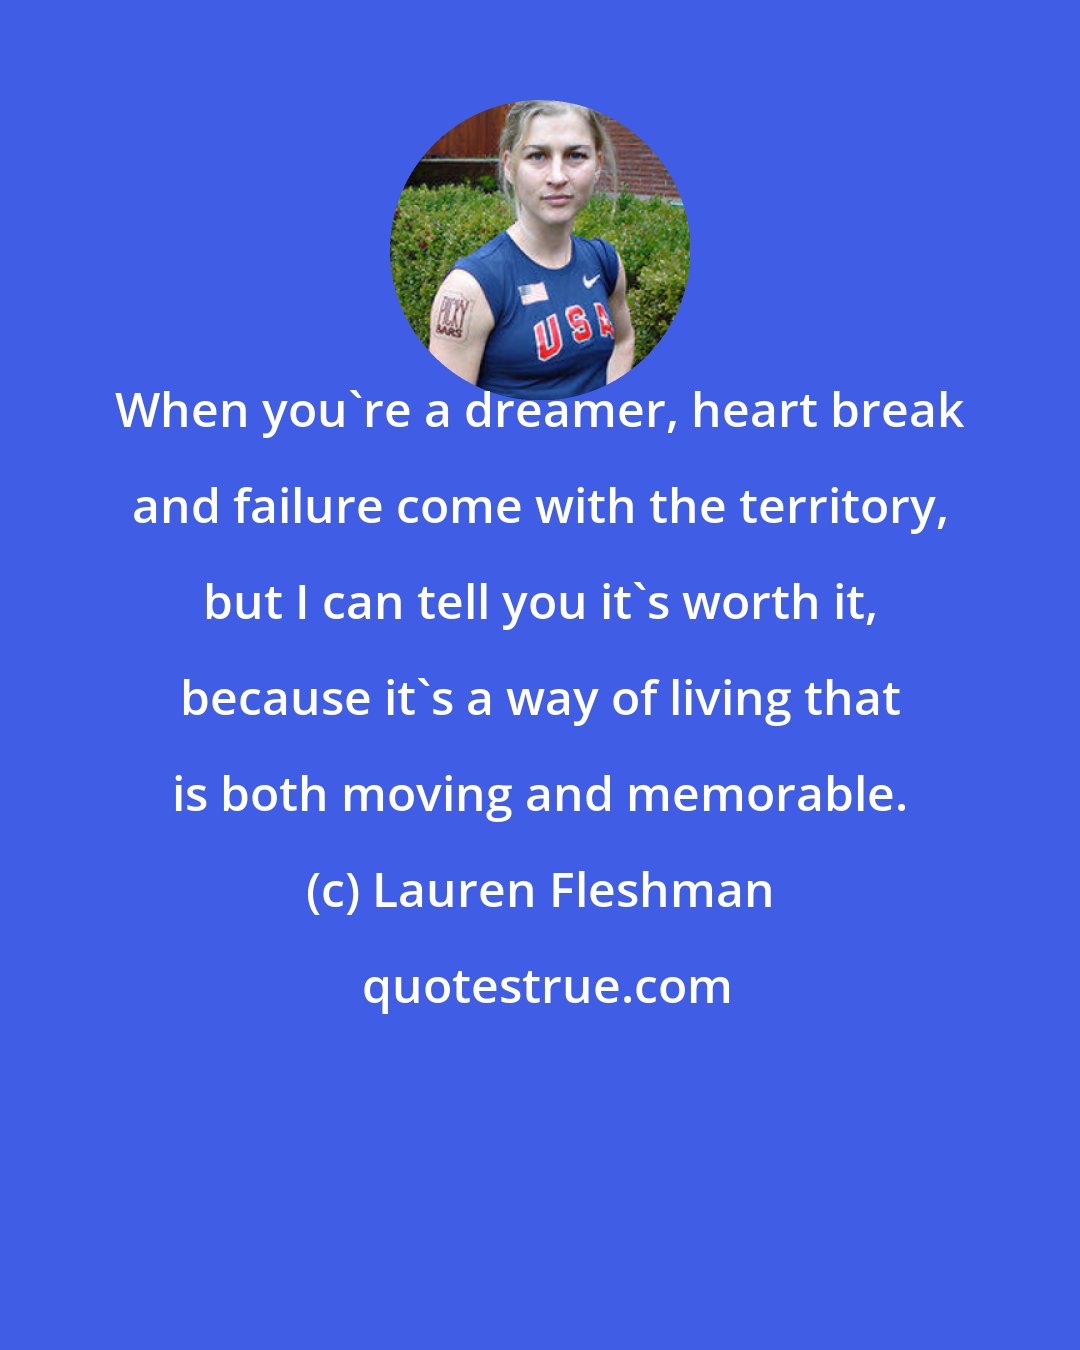 Lauren Fleshman: When you're a dreamer, heart break and failure come with the territory, but I can tell you it's worth it, because it's a way of living that is both moving and memorable.